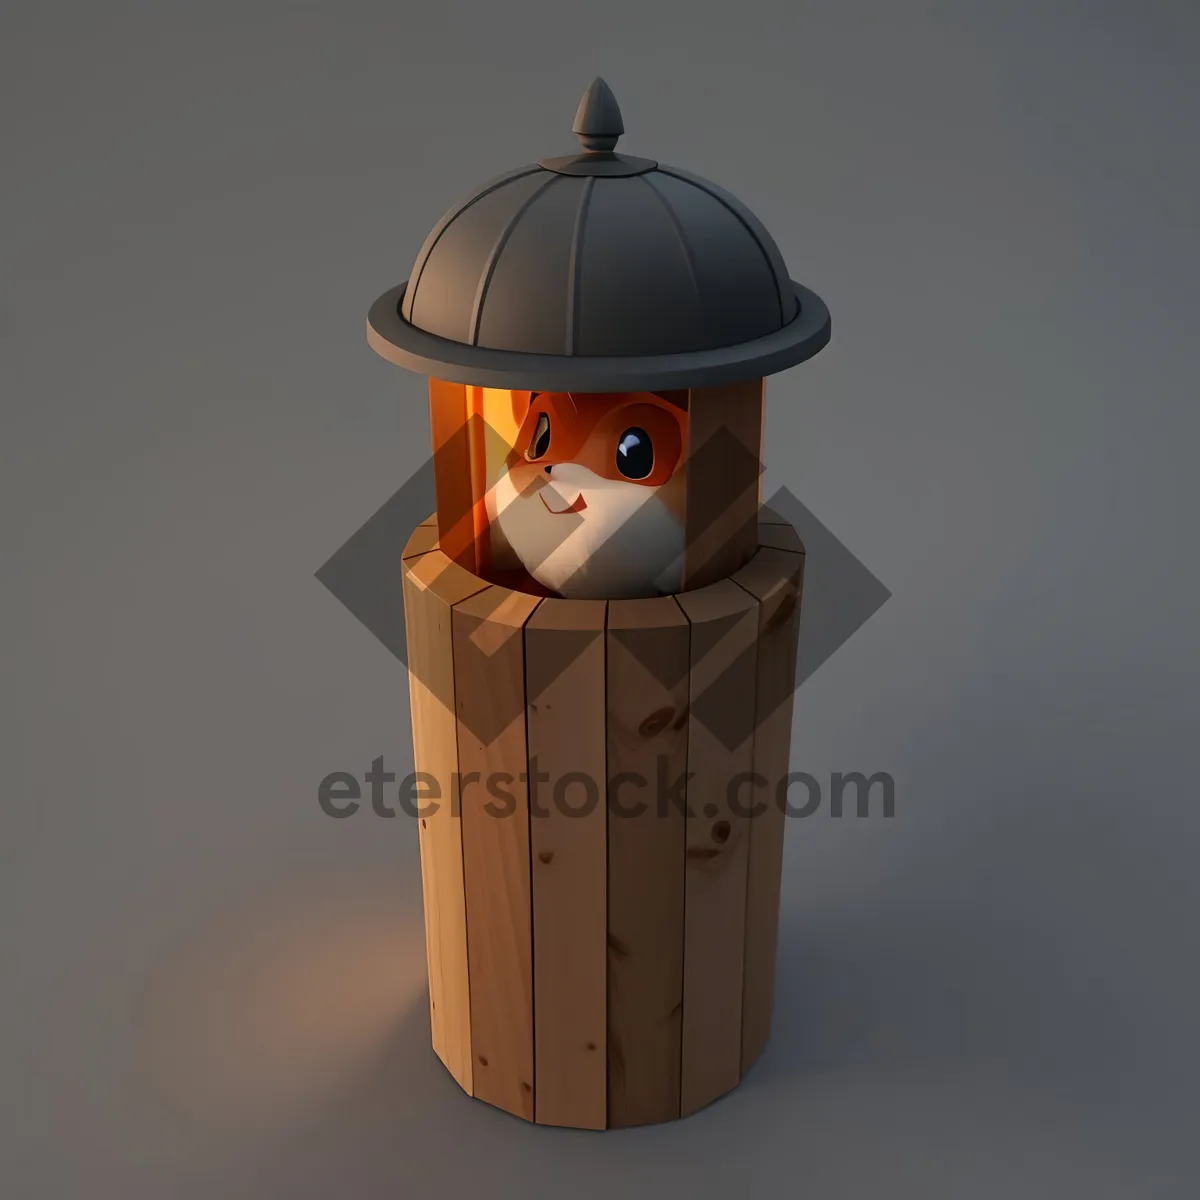 Picture of Birdhouse Lamp: Stylish Shelter with Protective Covering